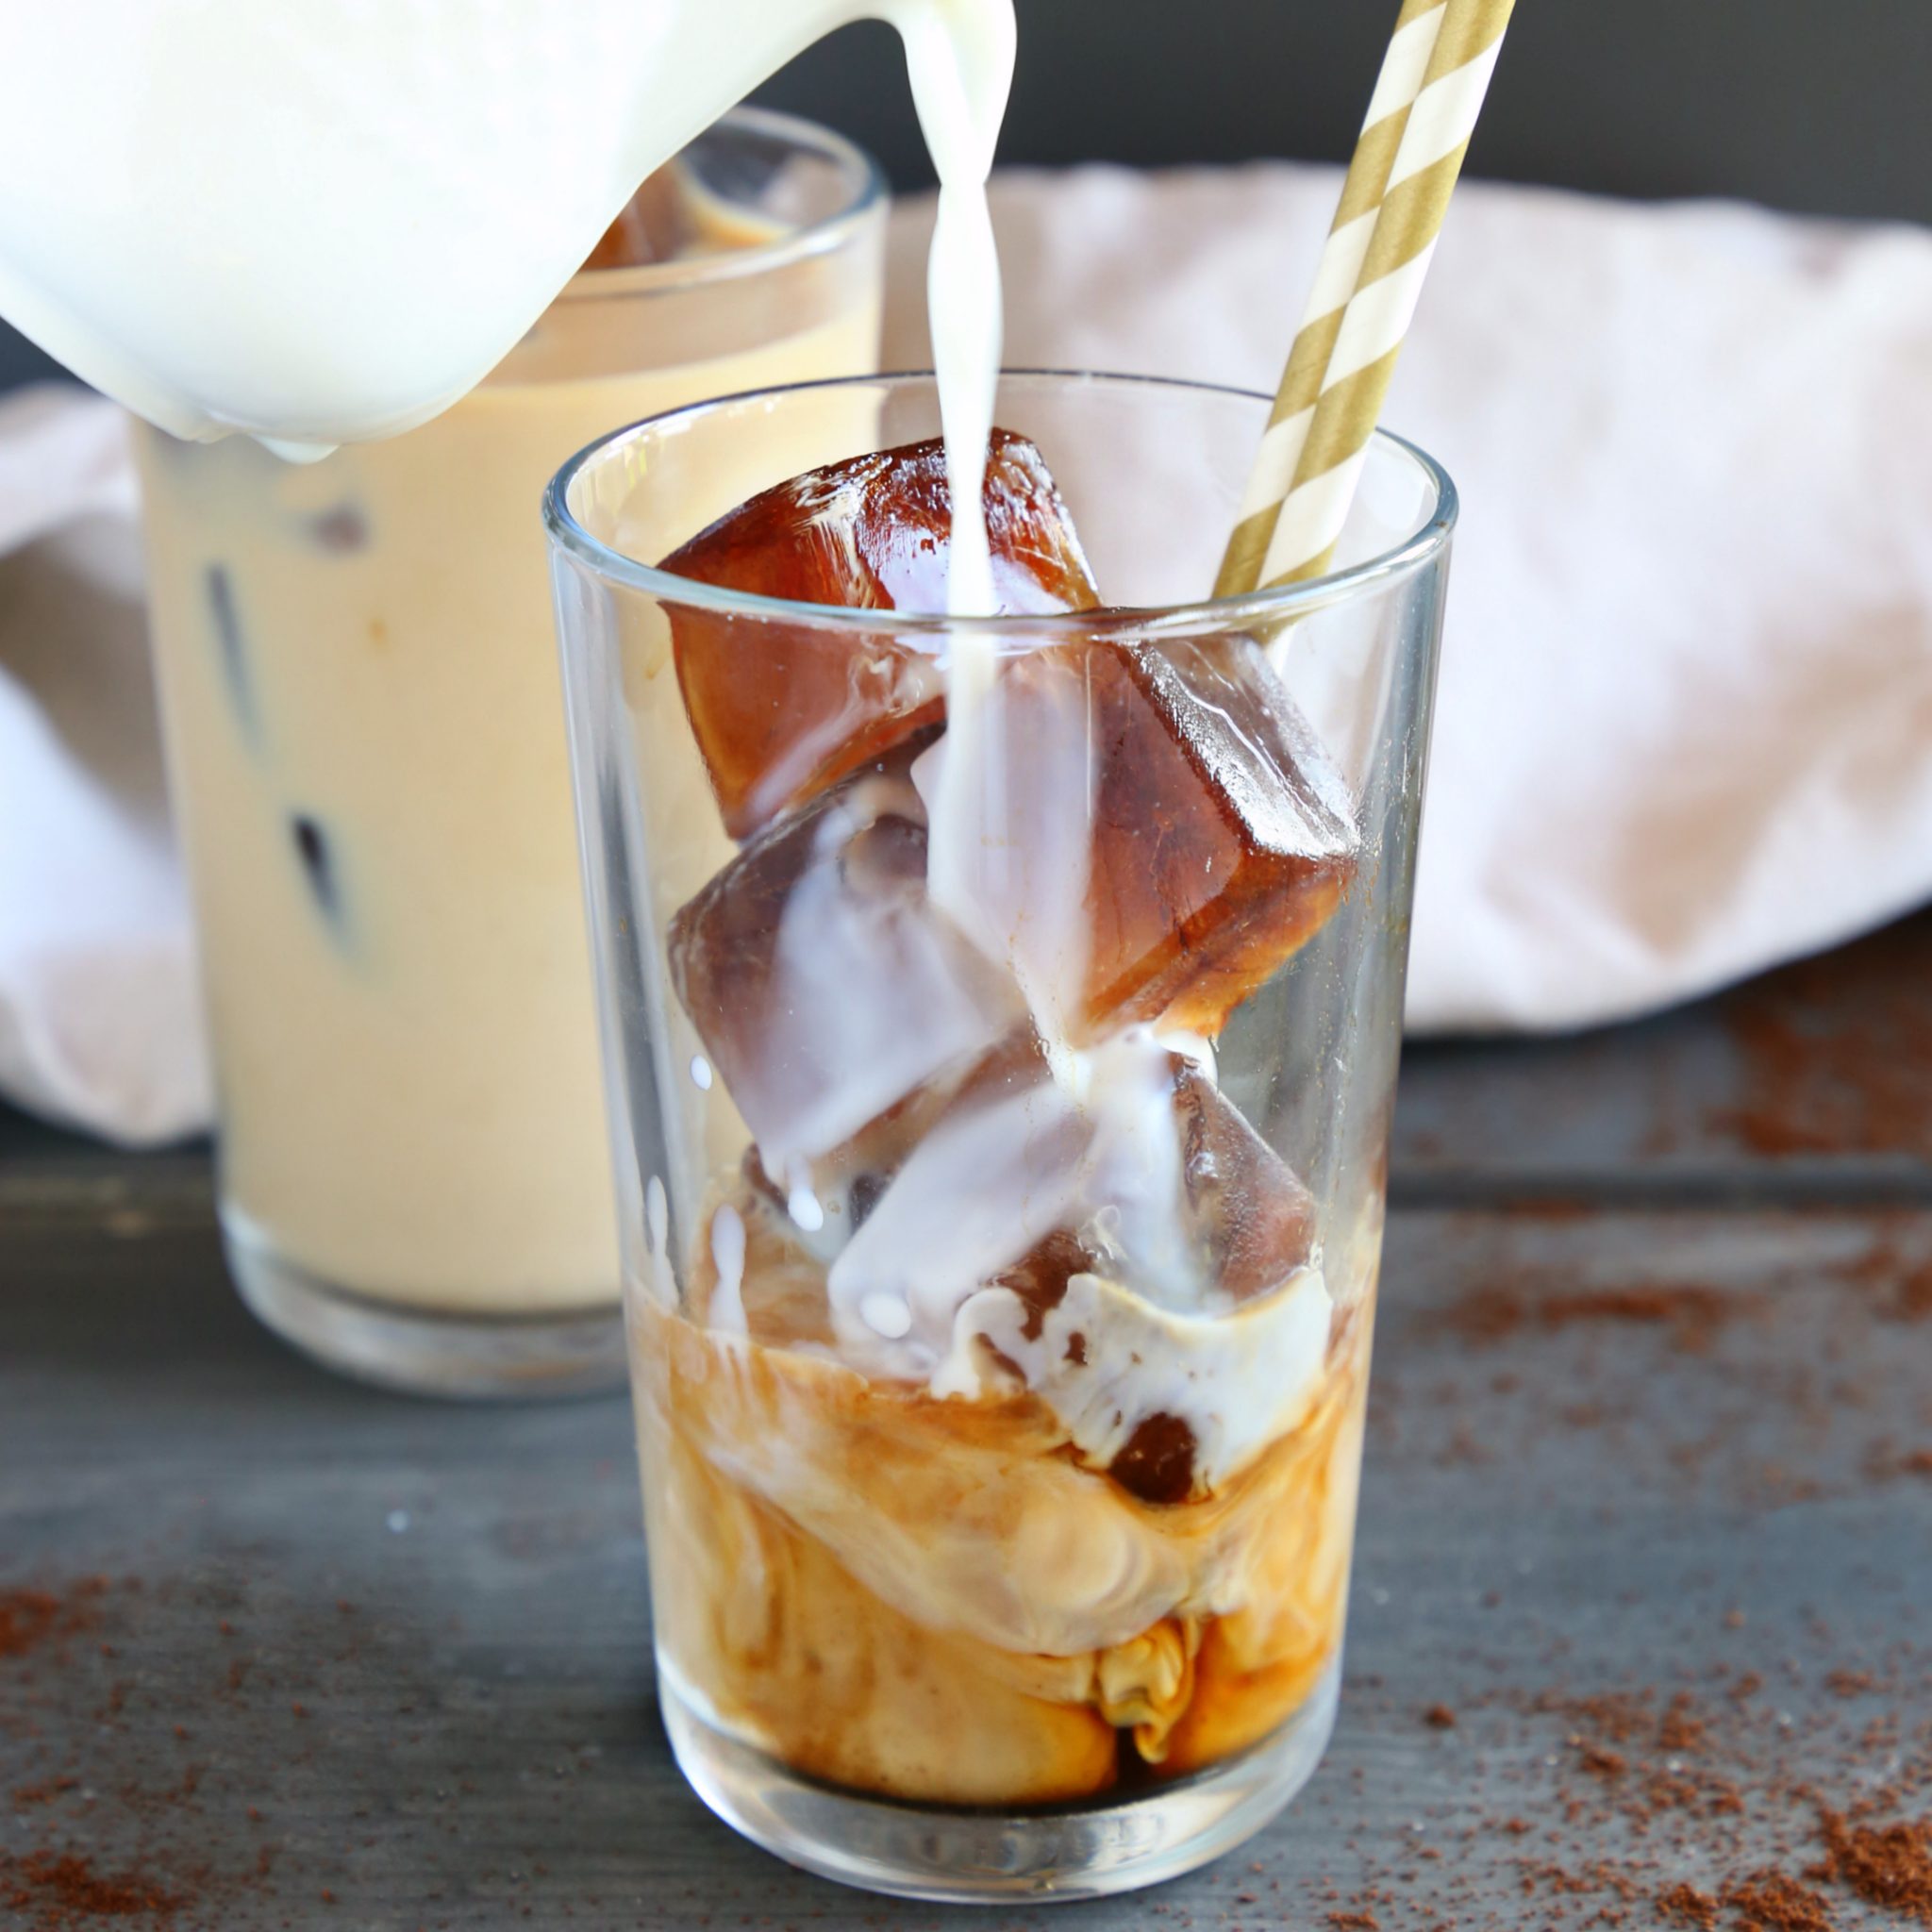 https://thebusybaker.ca/wp-content/uploads/2018/04/healthy-iced-coffee-fbig2.jpg